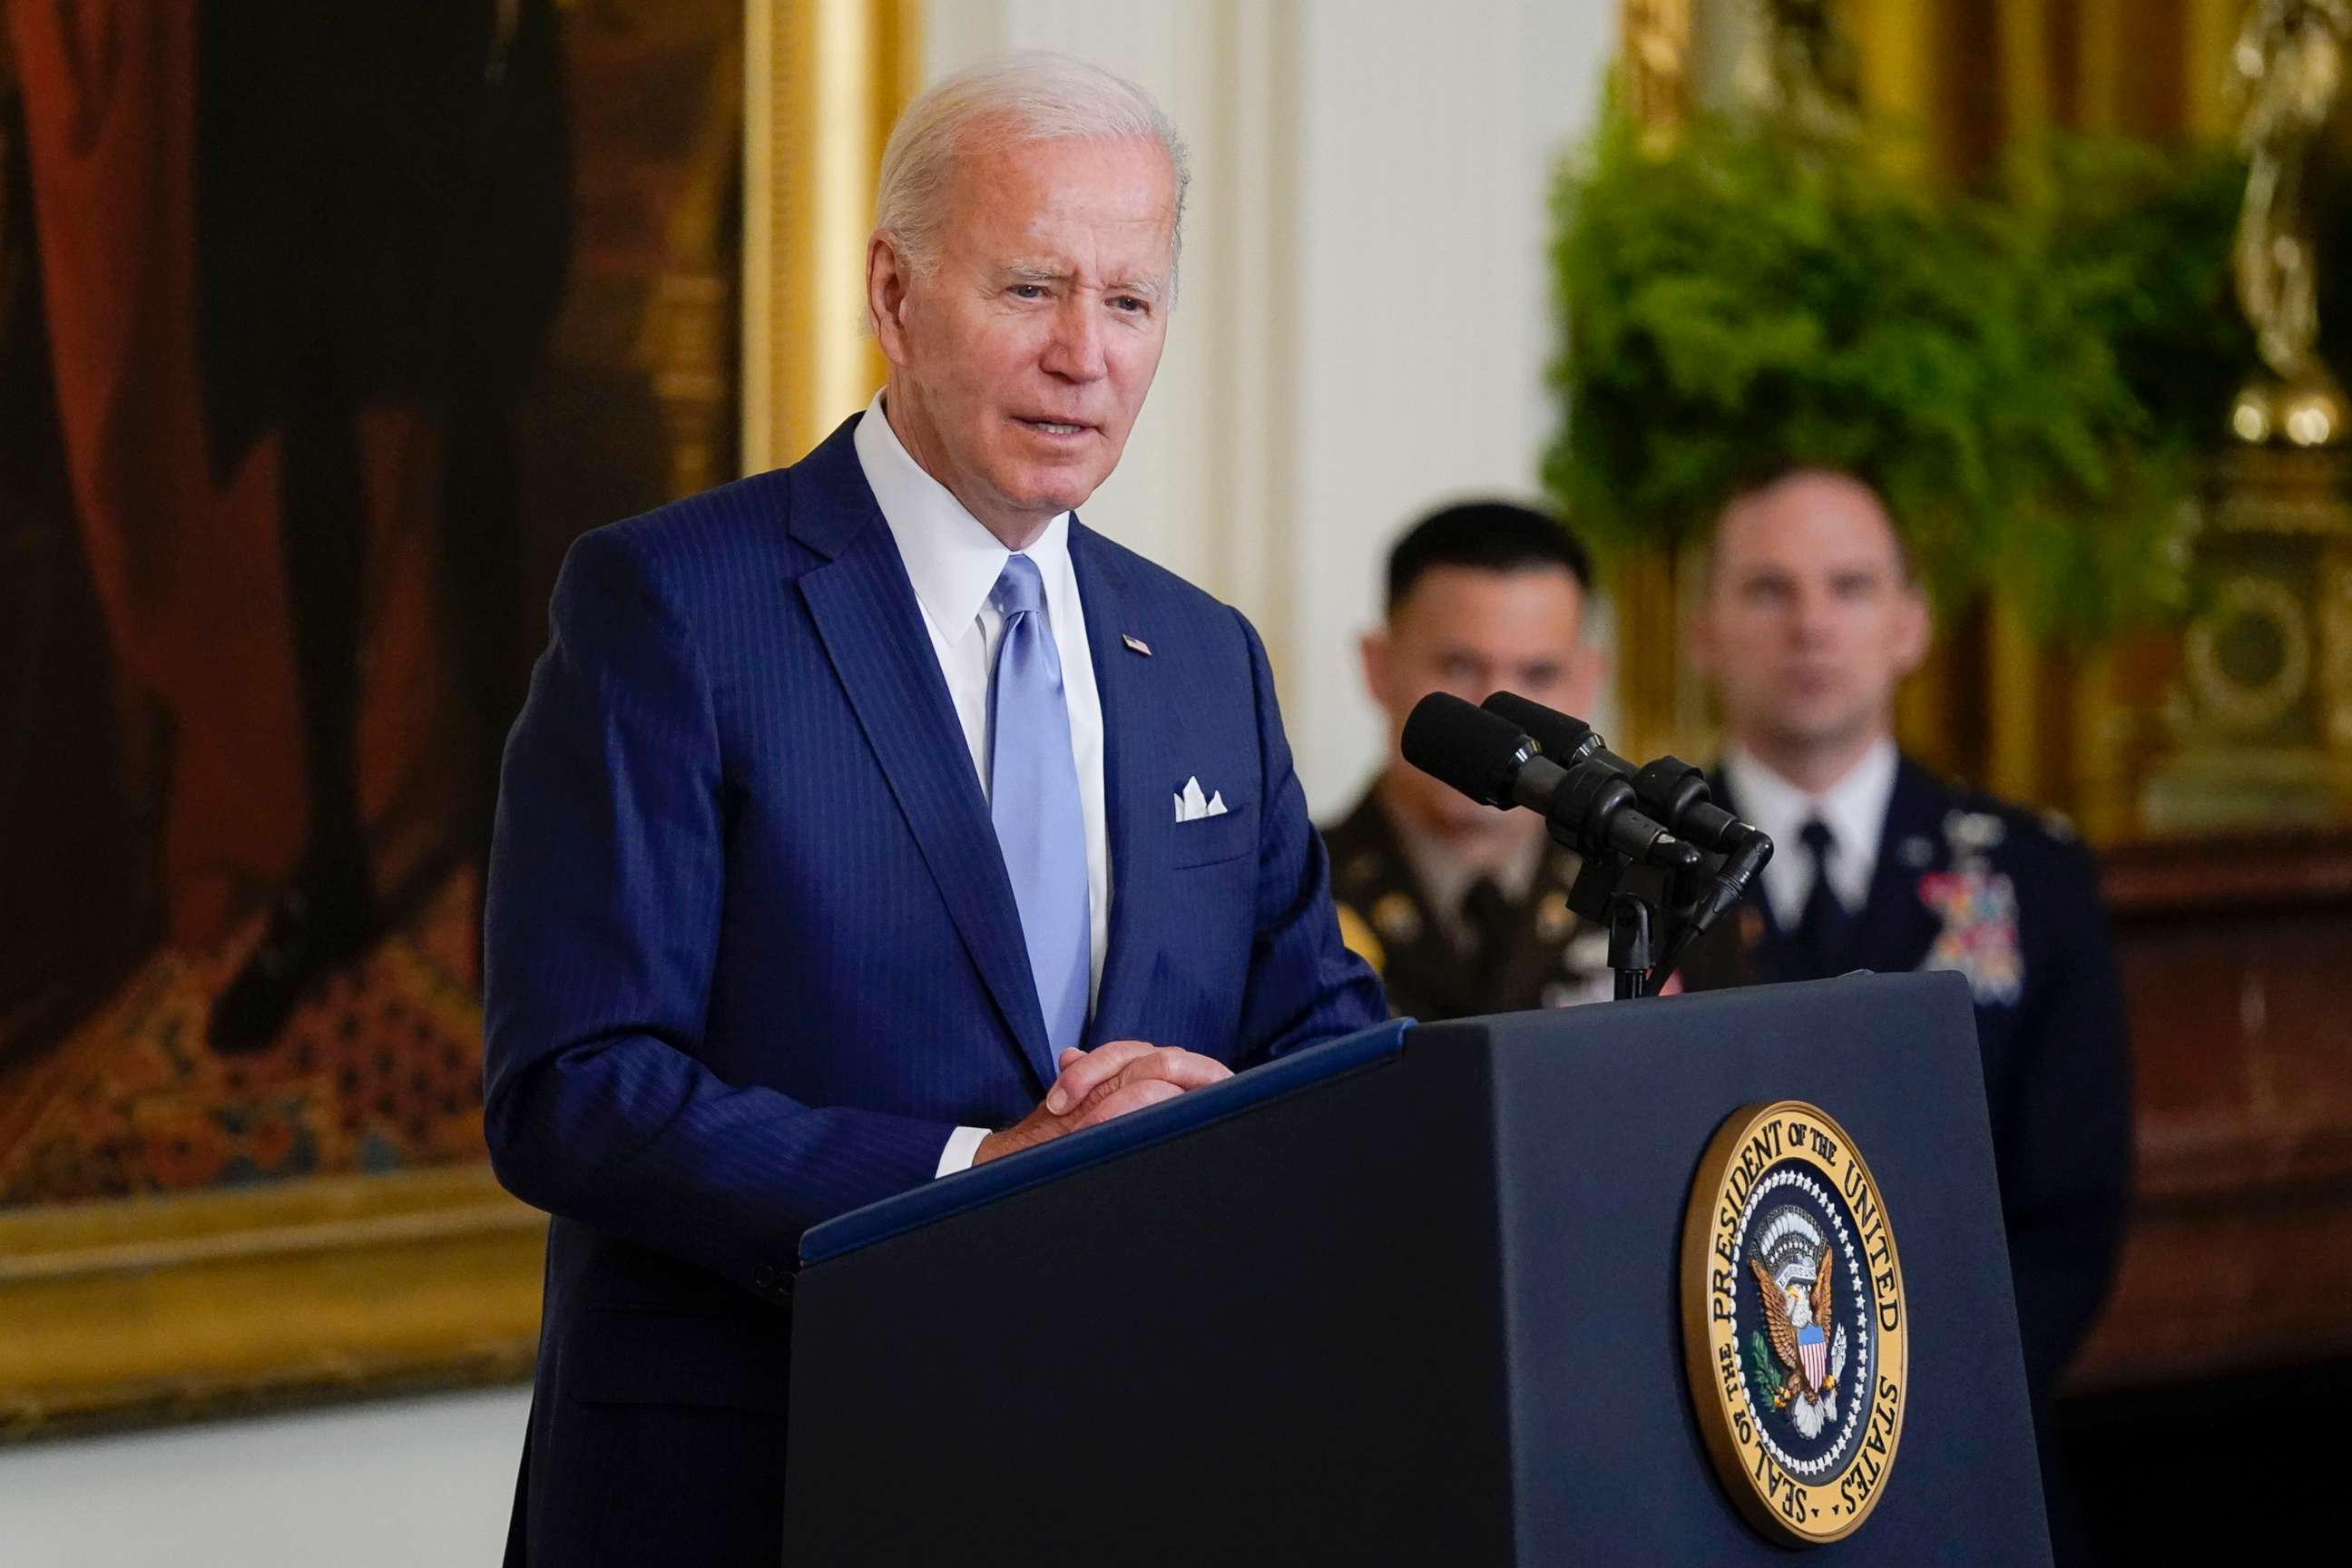 PHOTO: President Joe Biden speaks during a Medal of Honor ceremony in the East Room of the White House, July 5, 2022.